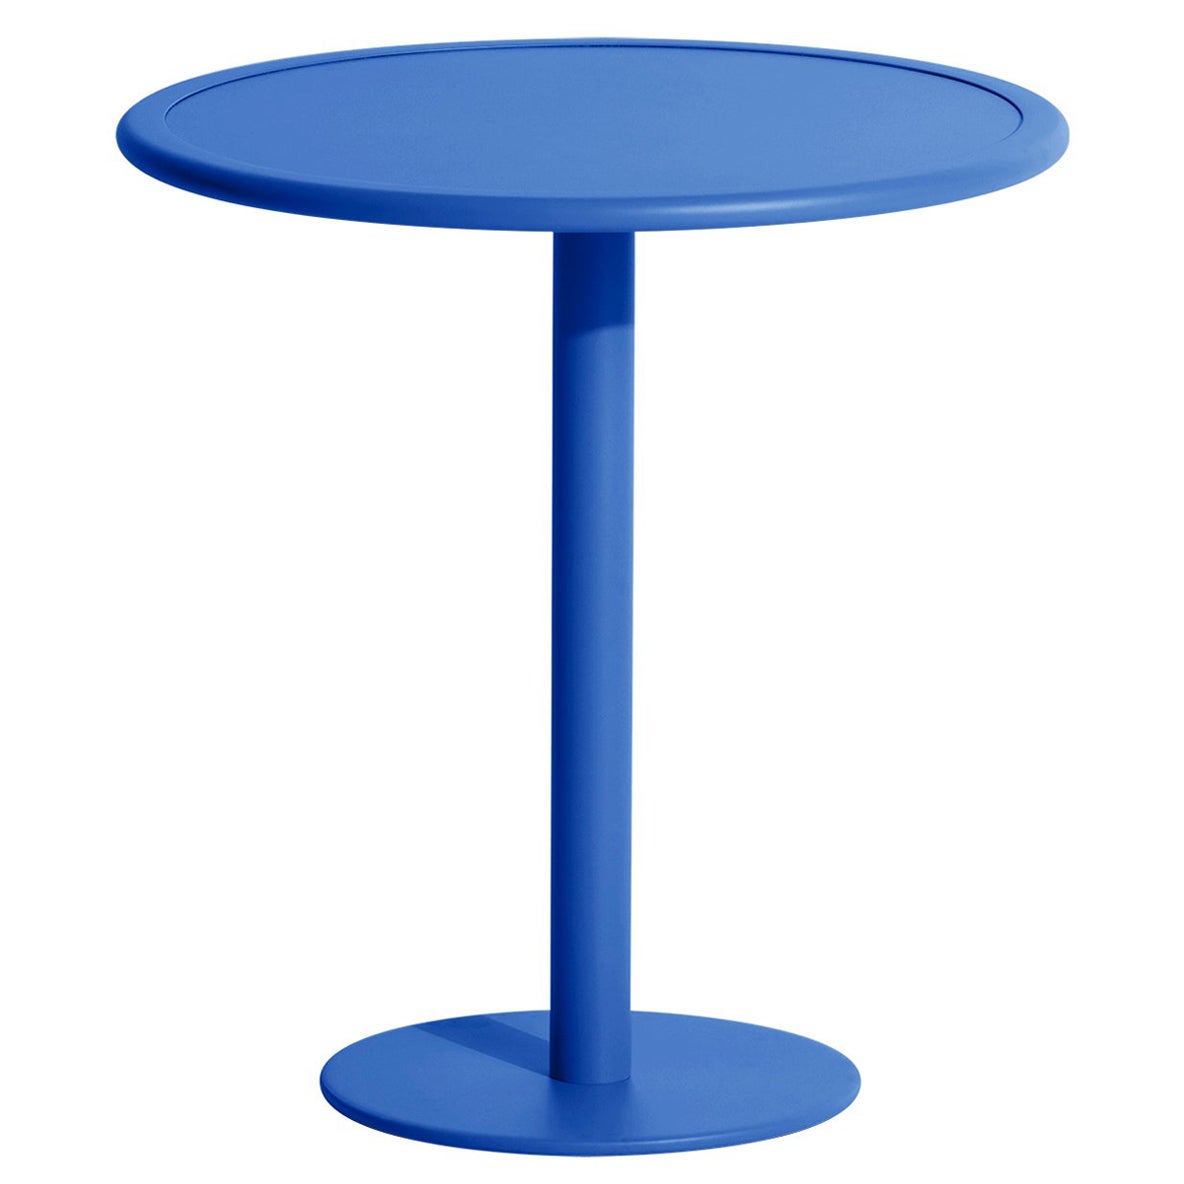 Petite Friture Week-End Bistro Round Dining Table in Blue Aluminium, 2017 For Sale